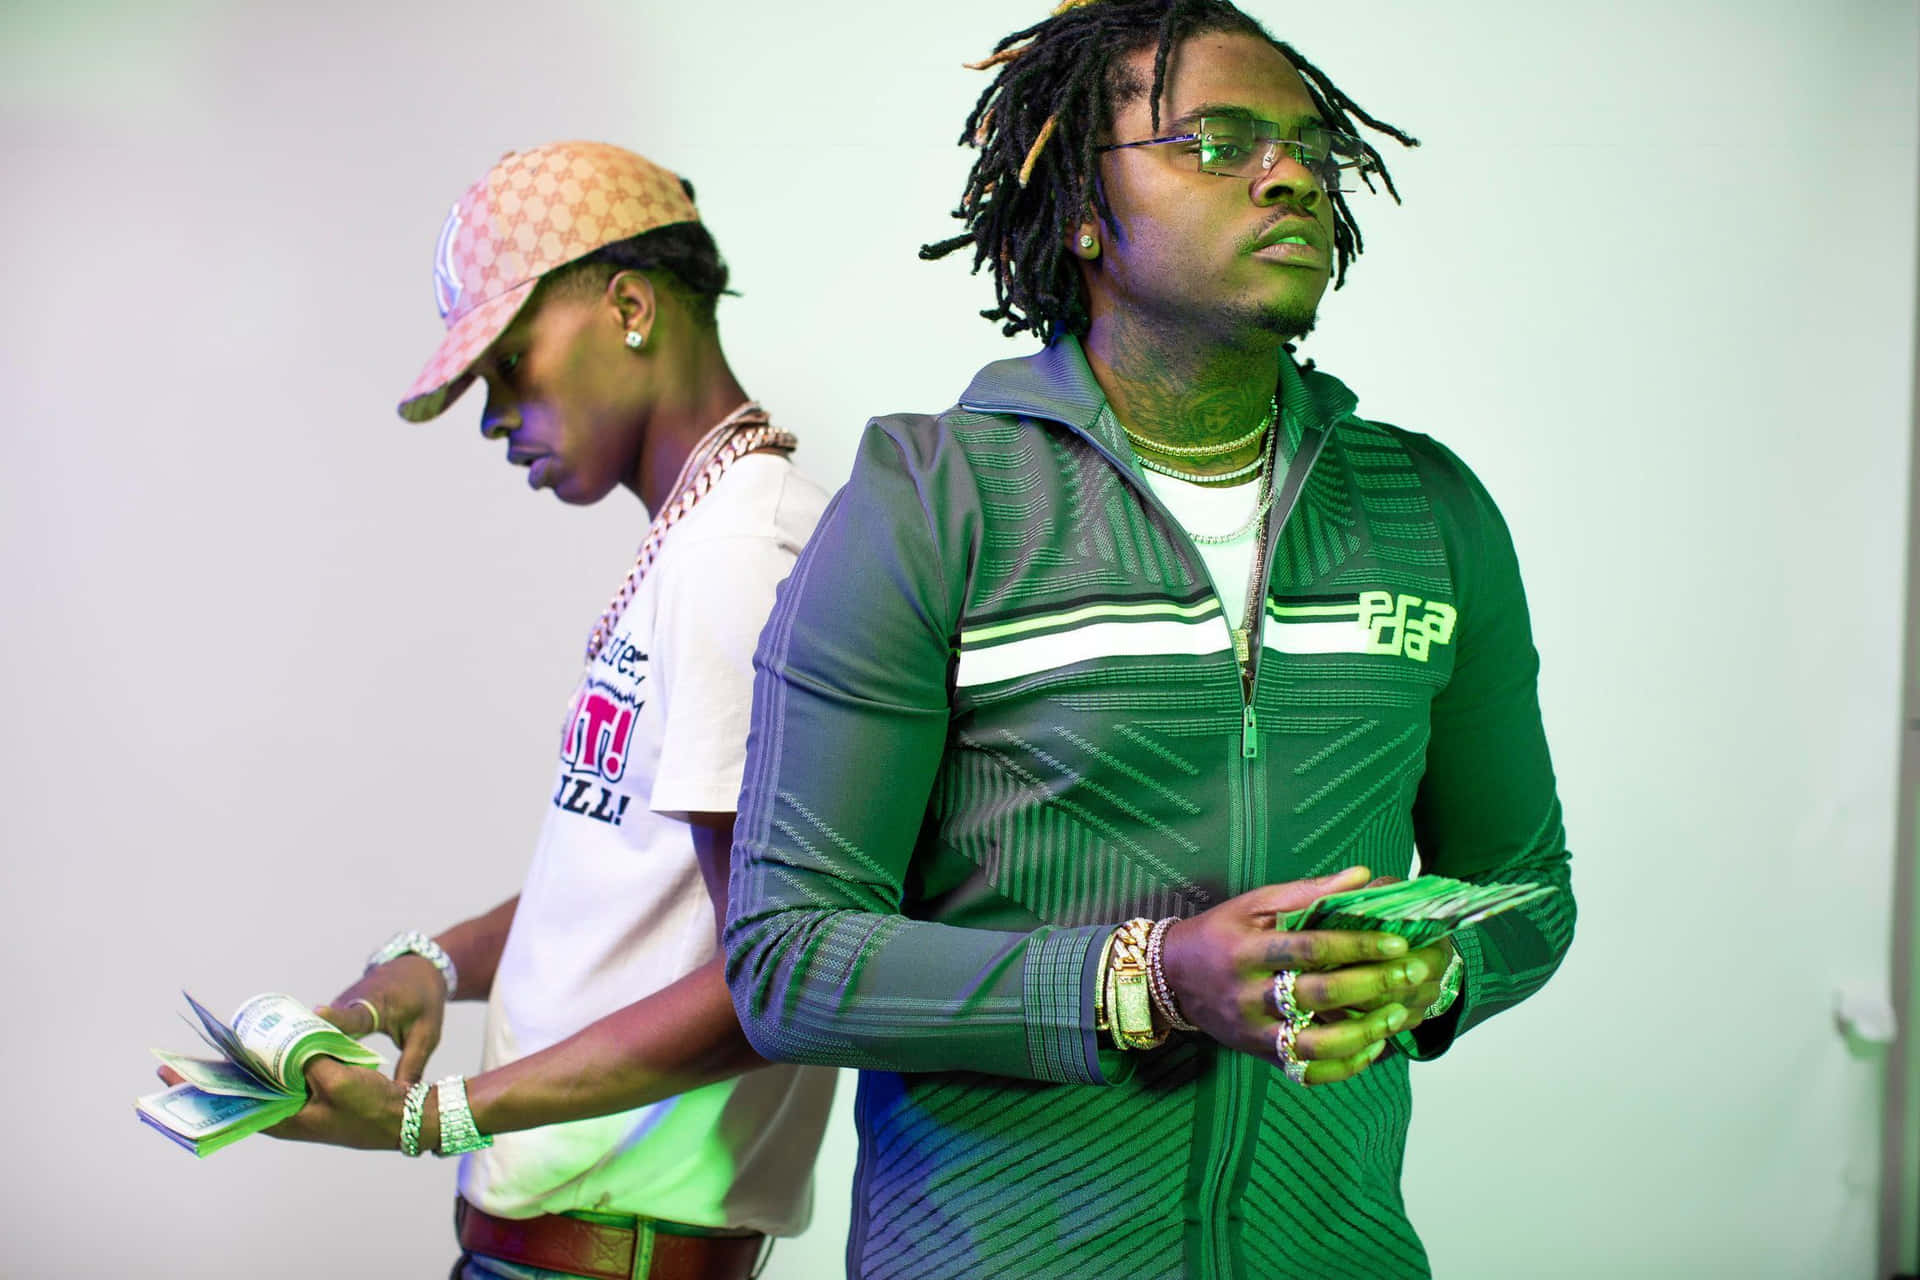 Gunna And Rapper Lil Baby Wallpaper